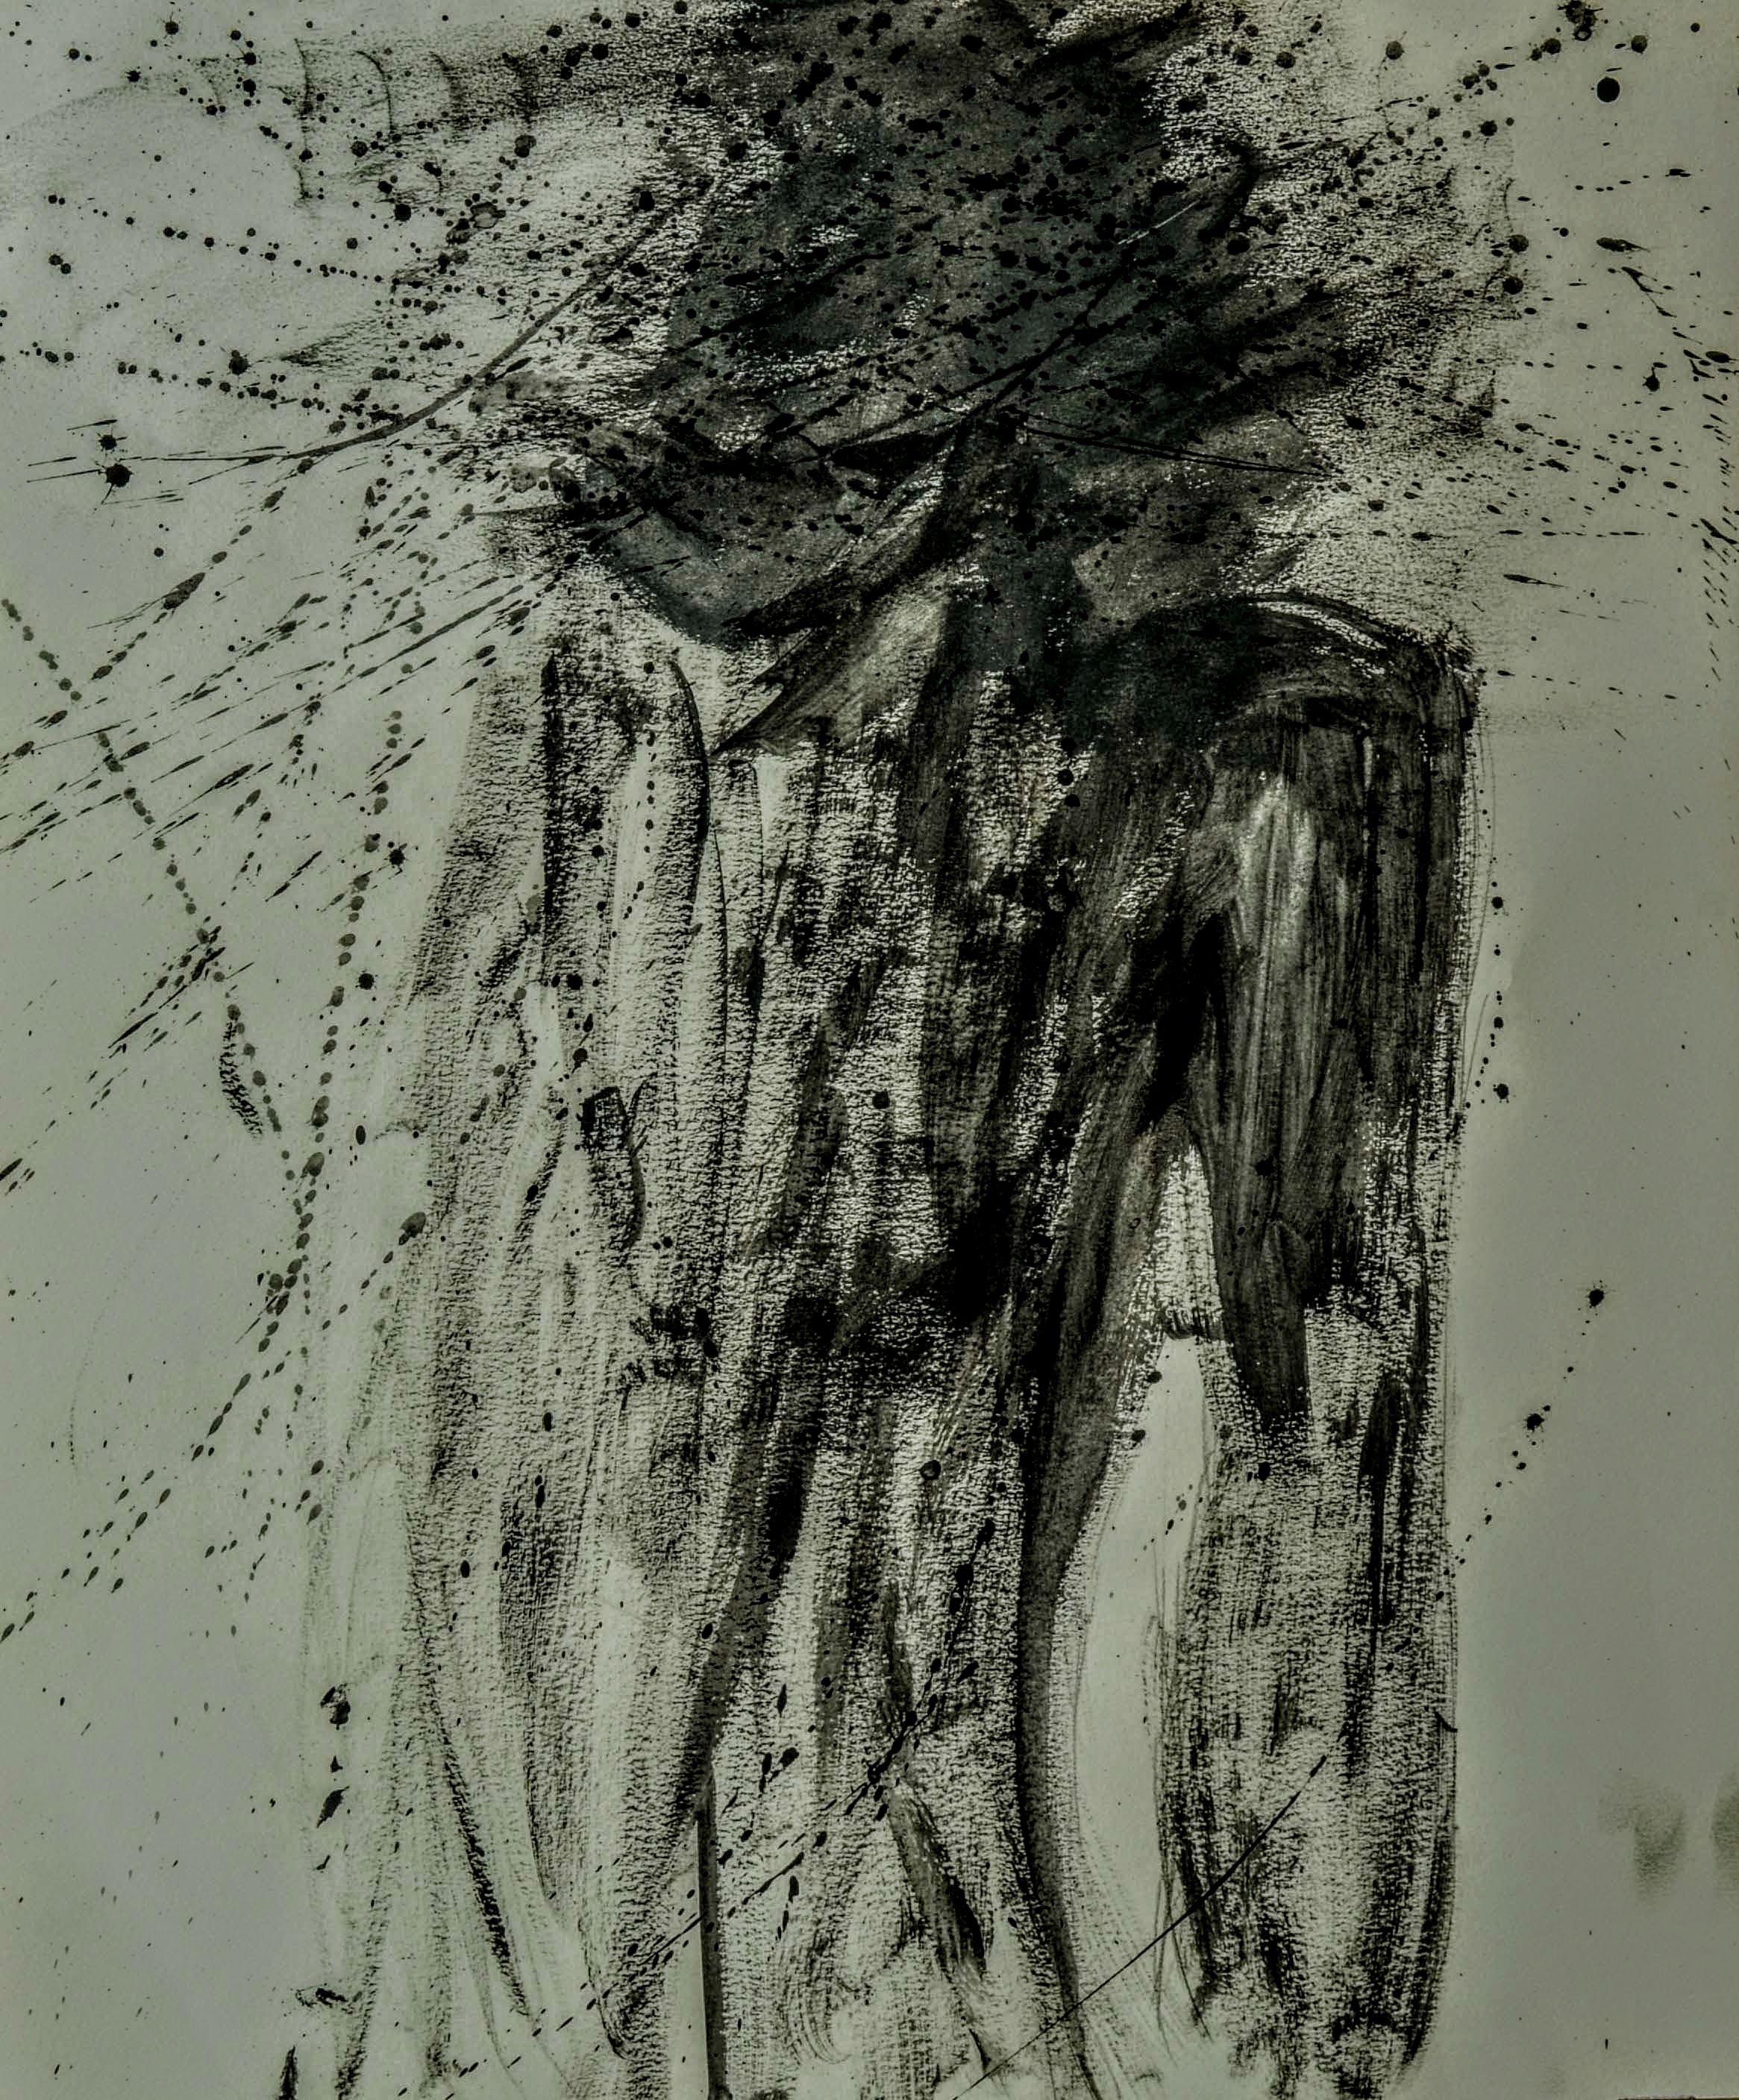 A series of abstract ink splatters and strokes that resemble a humanoid figure.